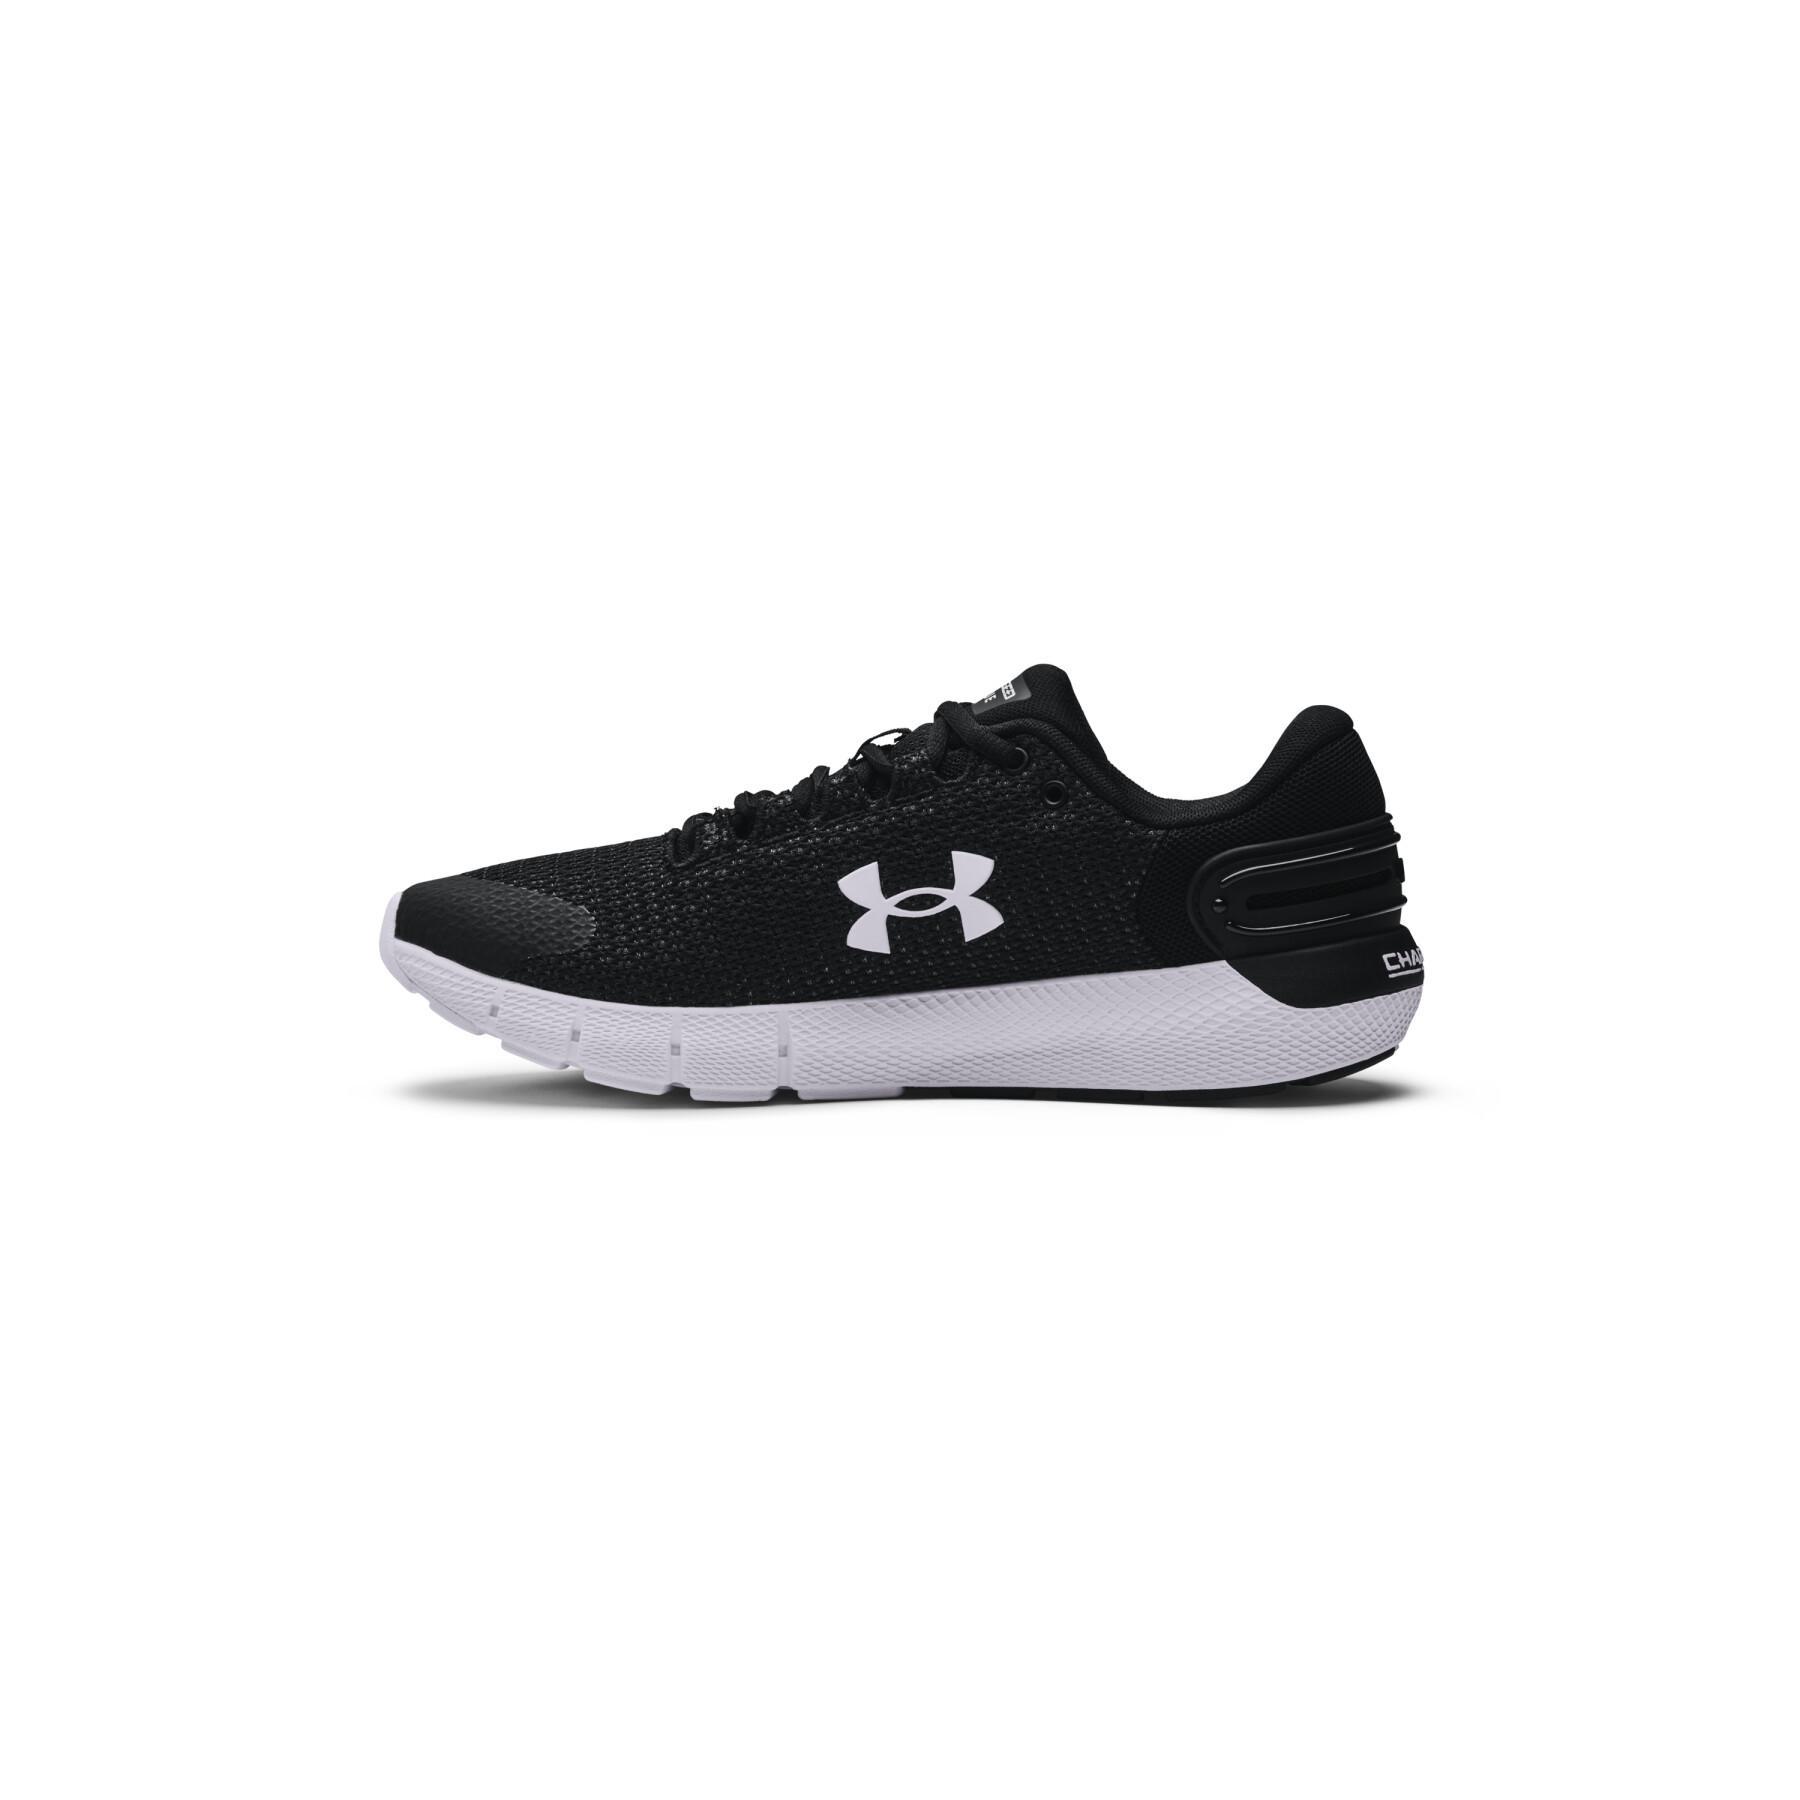 Laufschuhe Under Armour Charged Rogue 2.5